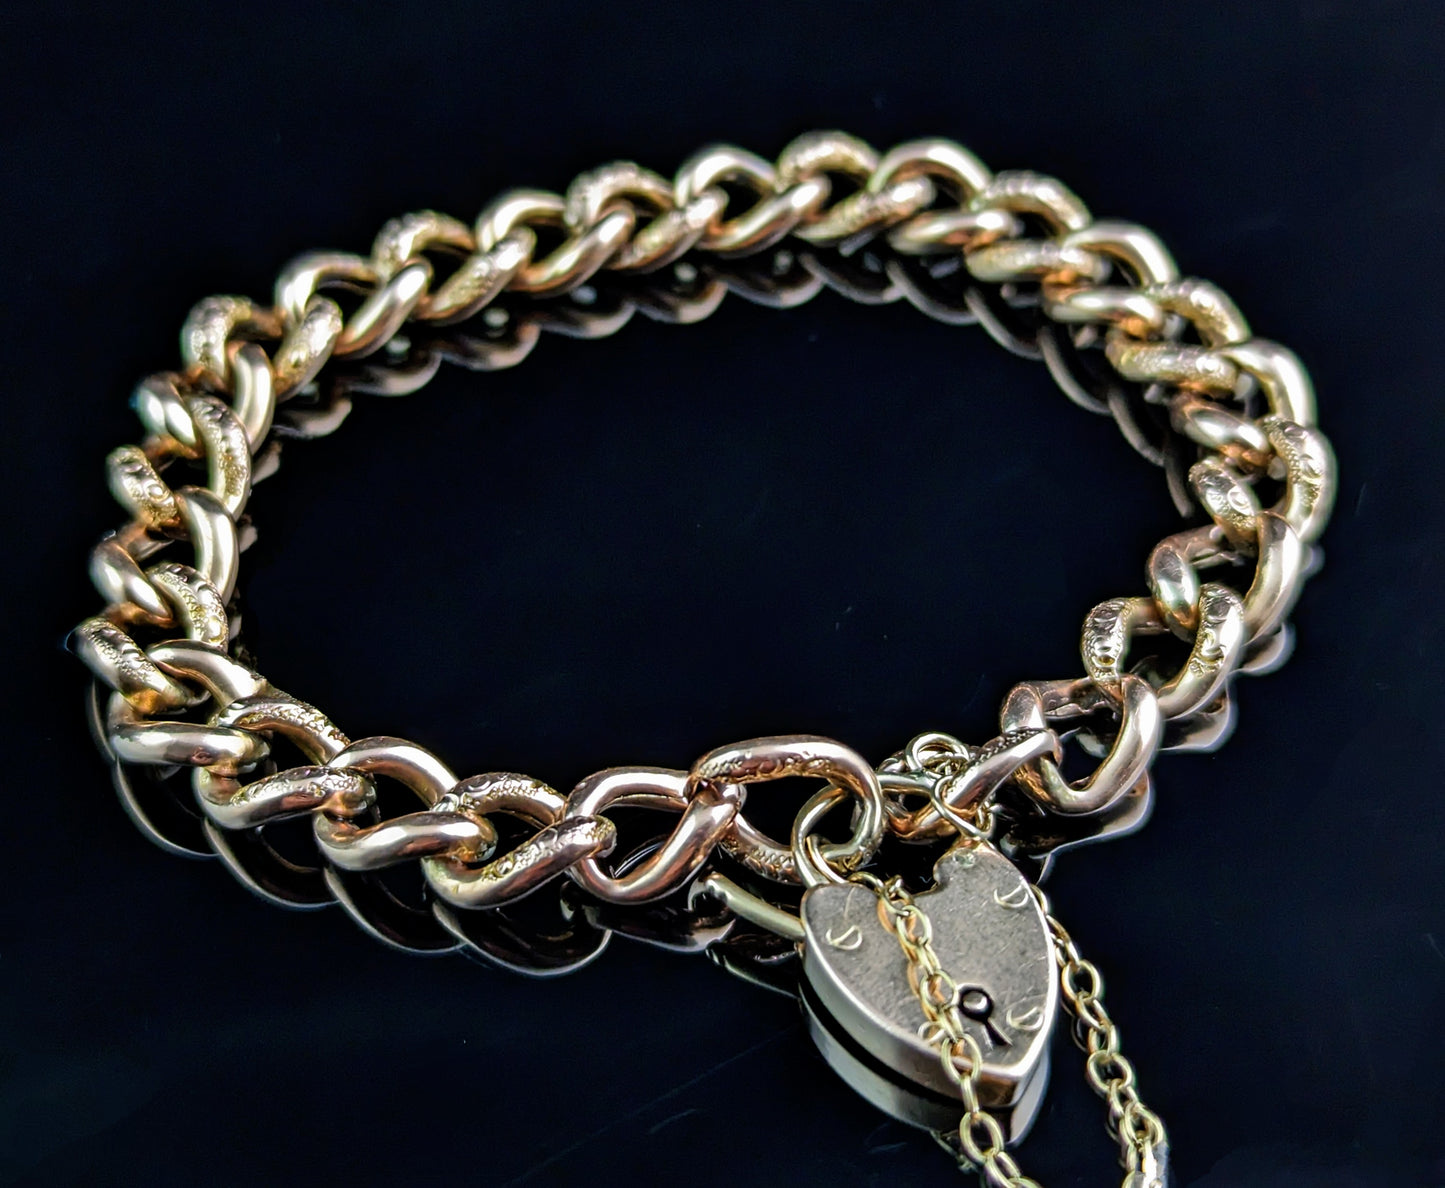 Antique 9ct gold curb link bracelet, Edwardian, Day to night